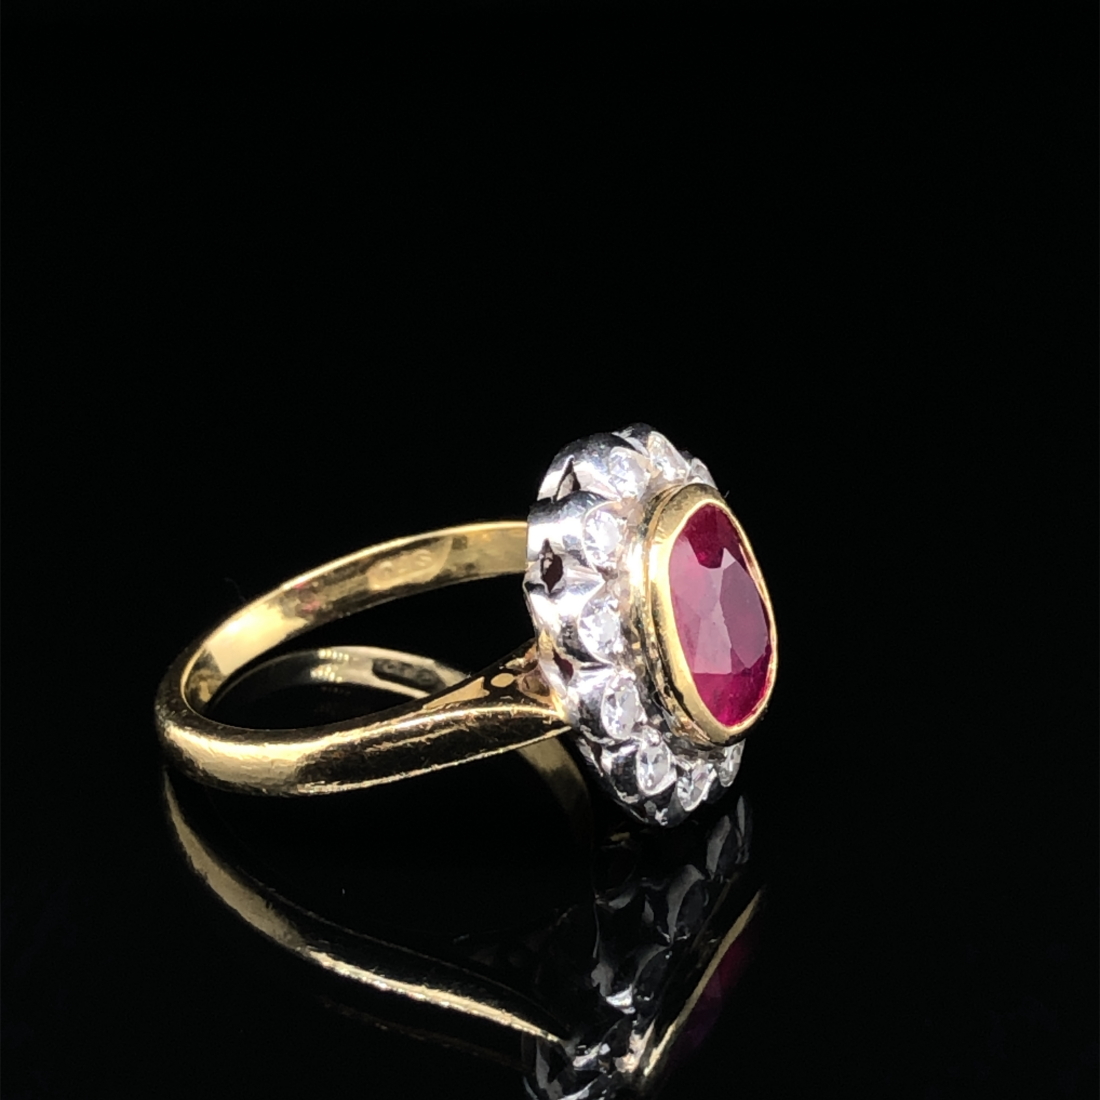 AN 18ct HALLMARKED GOLD RUBY AND DIAMOND OVAL SHAPED CLUSTER RING. THE SINGLE MEDIUM TO DARK